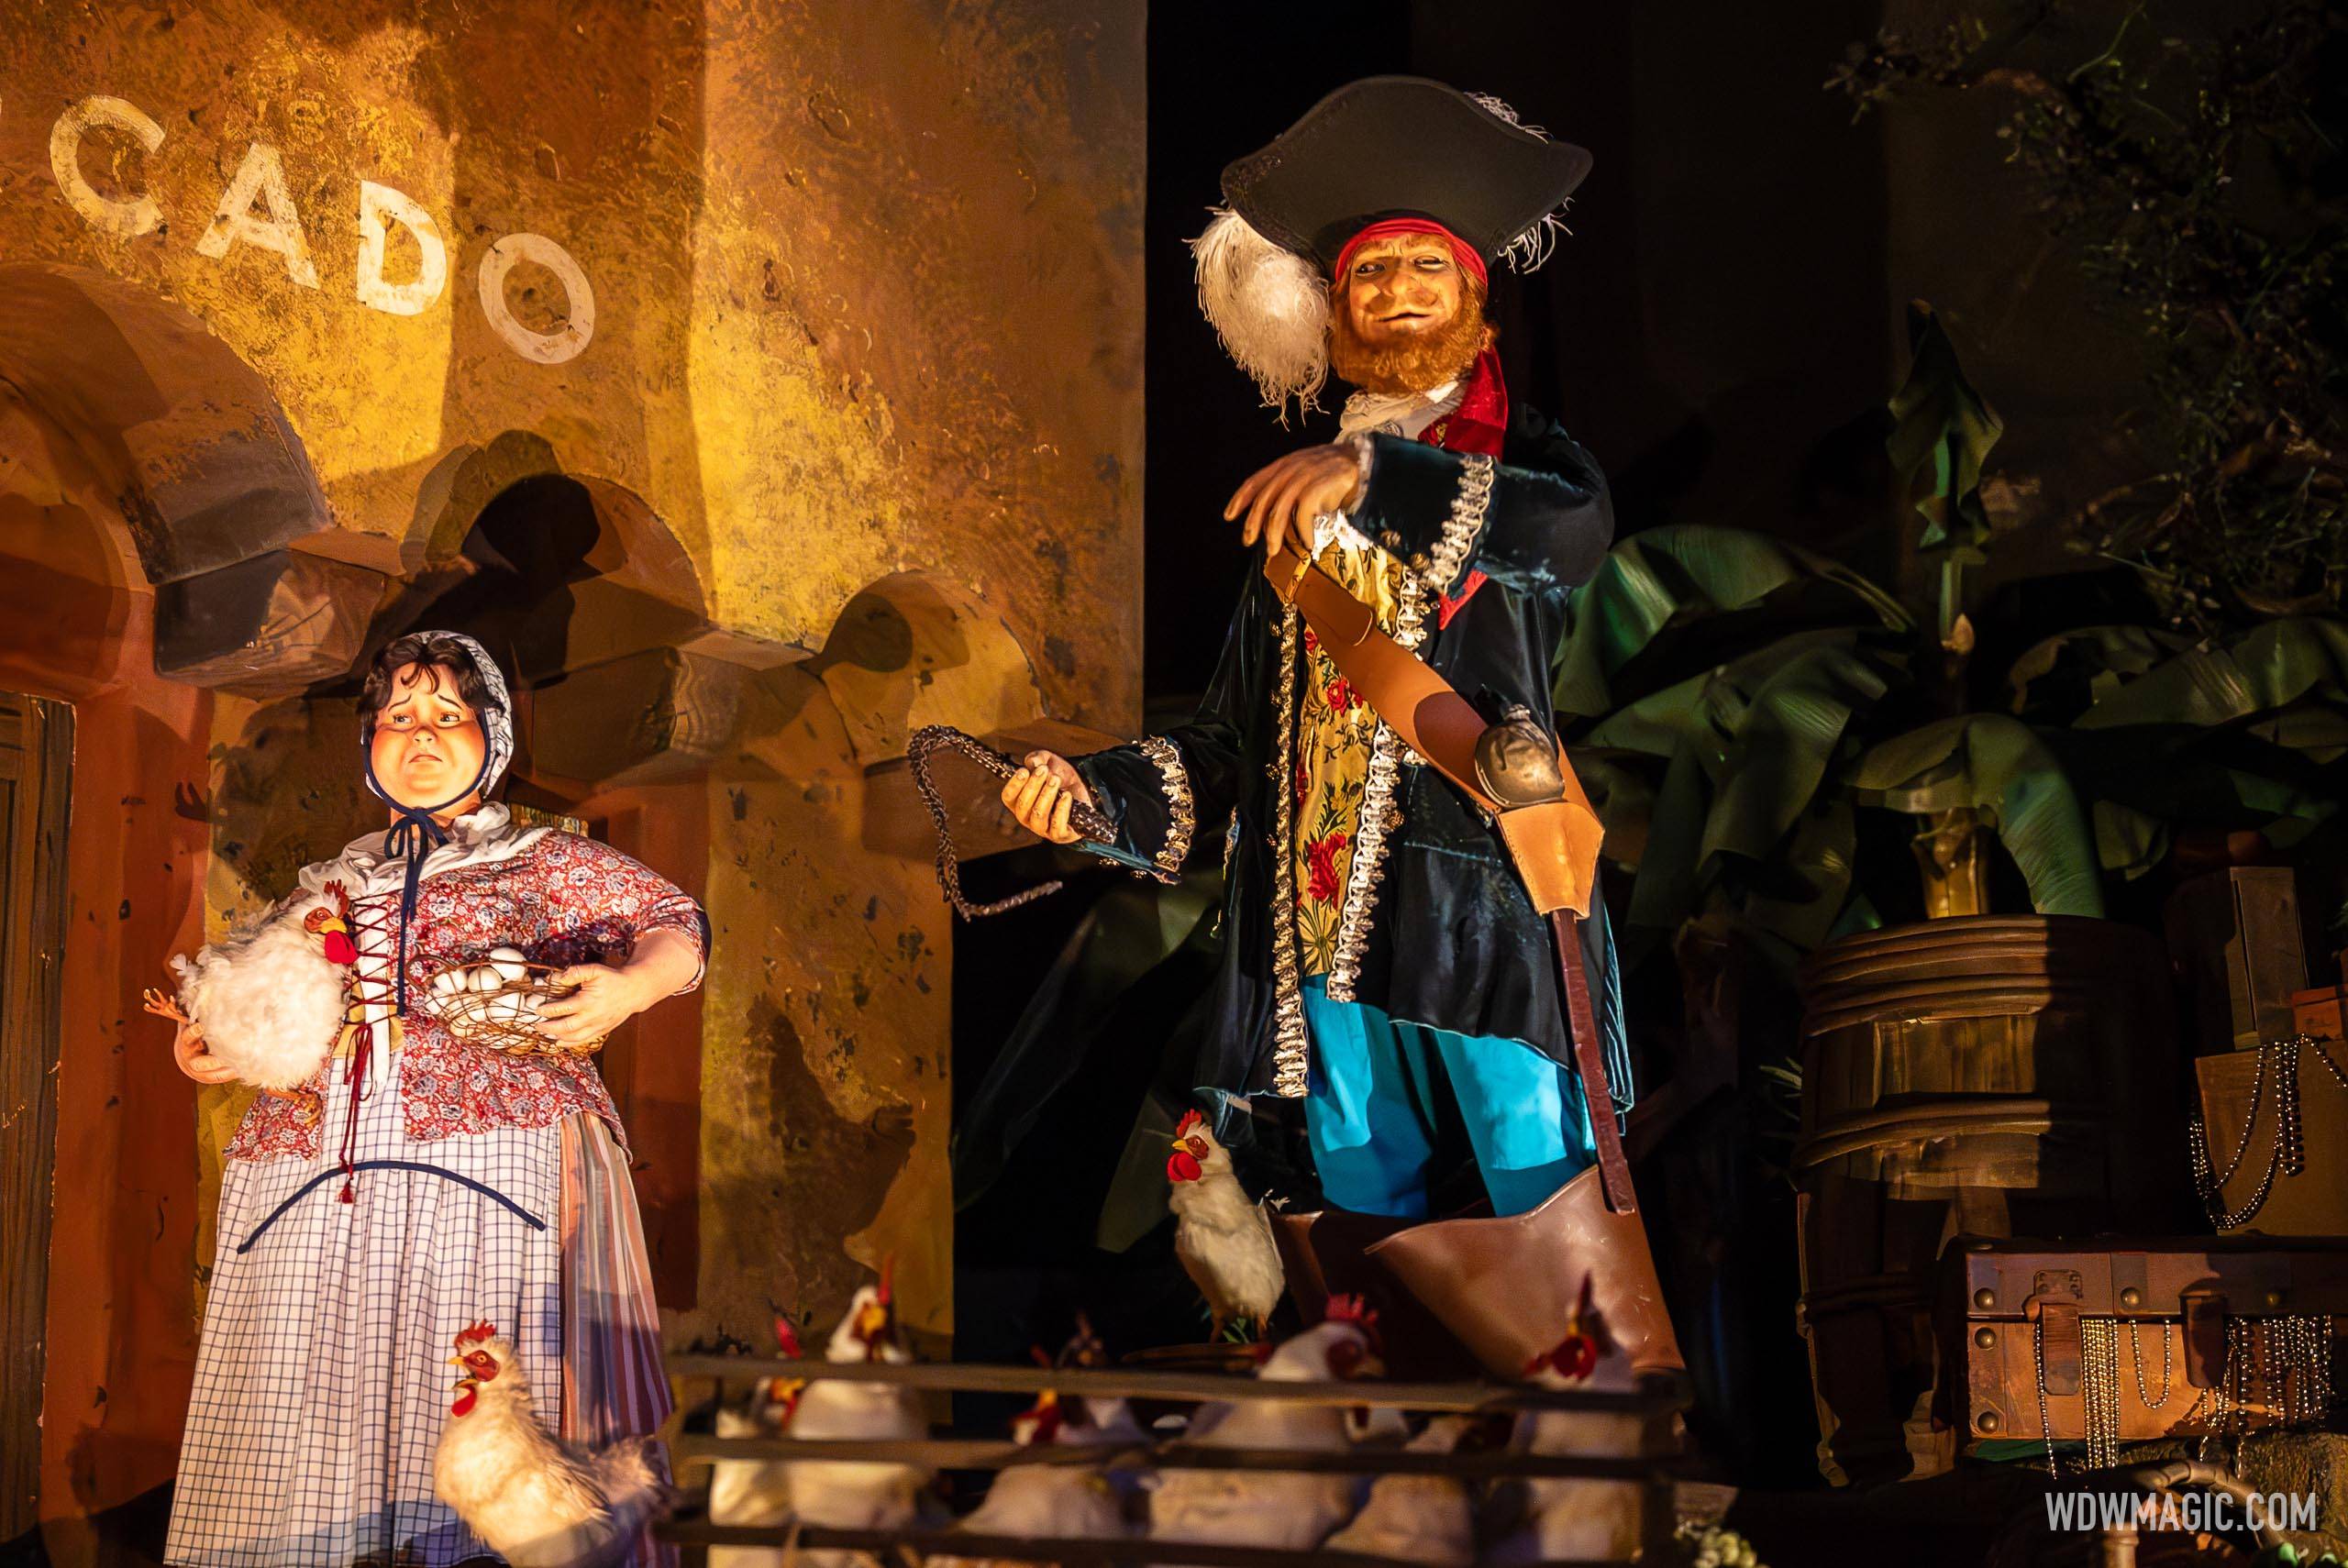 VIDEO - A look at the newly refurbished Pirates of the Caribbean